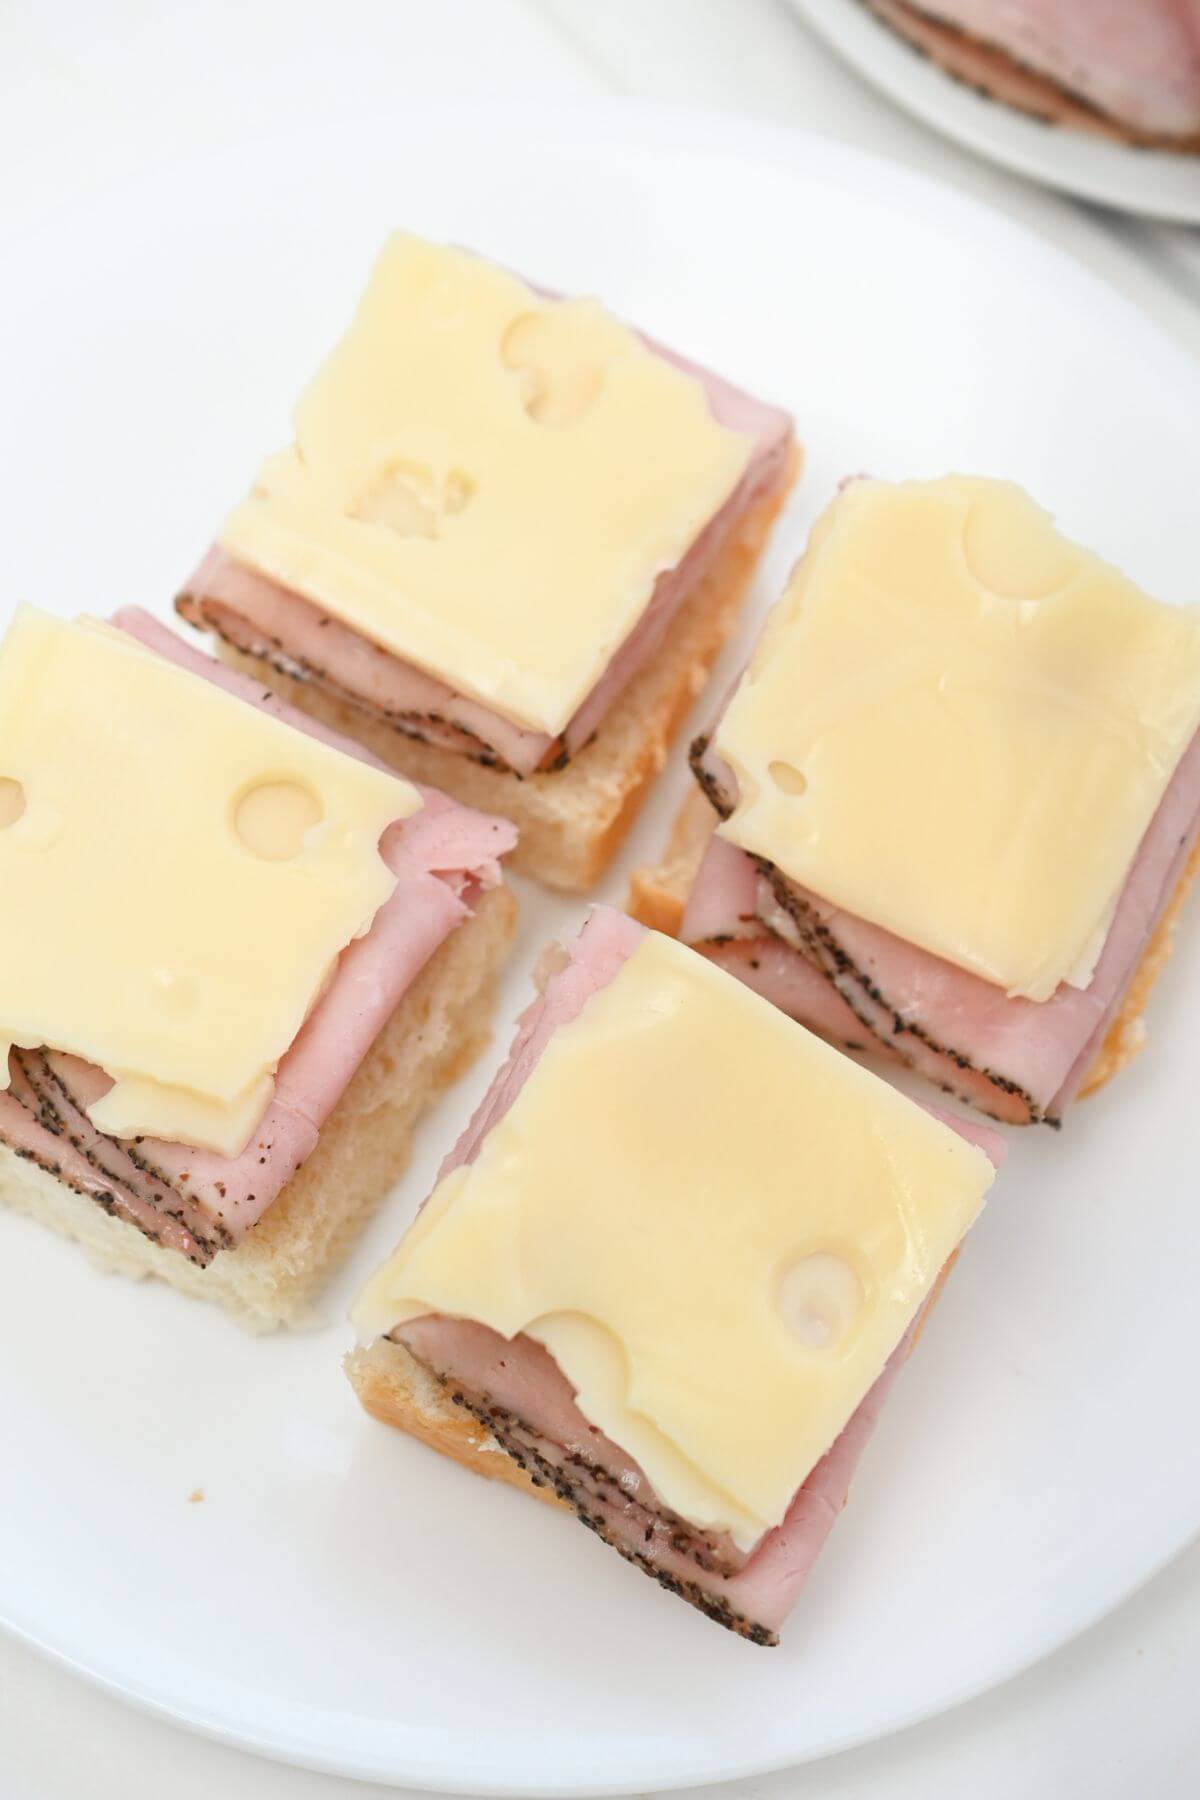 Four slices of ham and cheese on a plate.